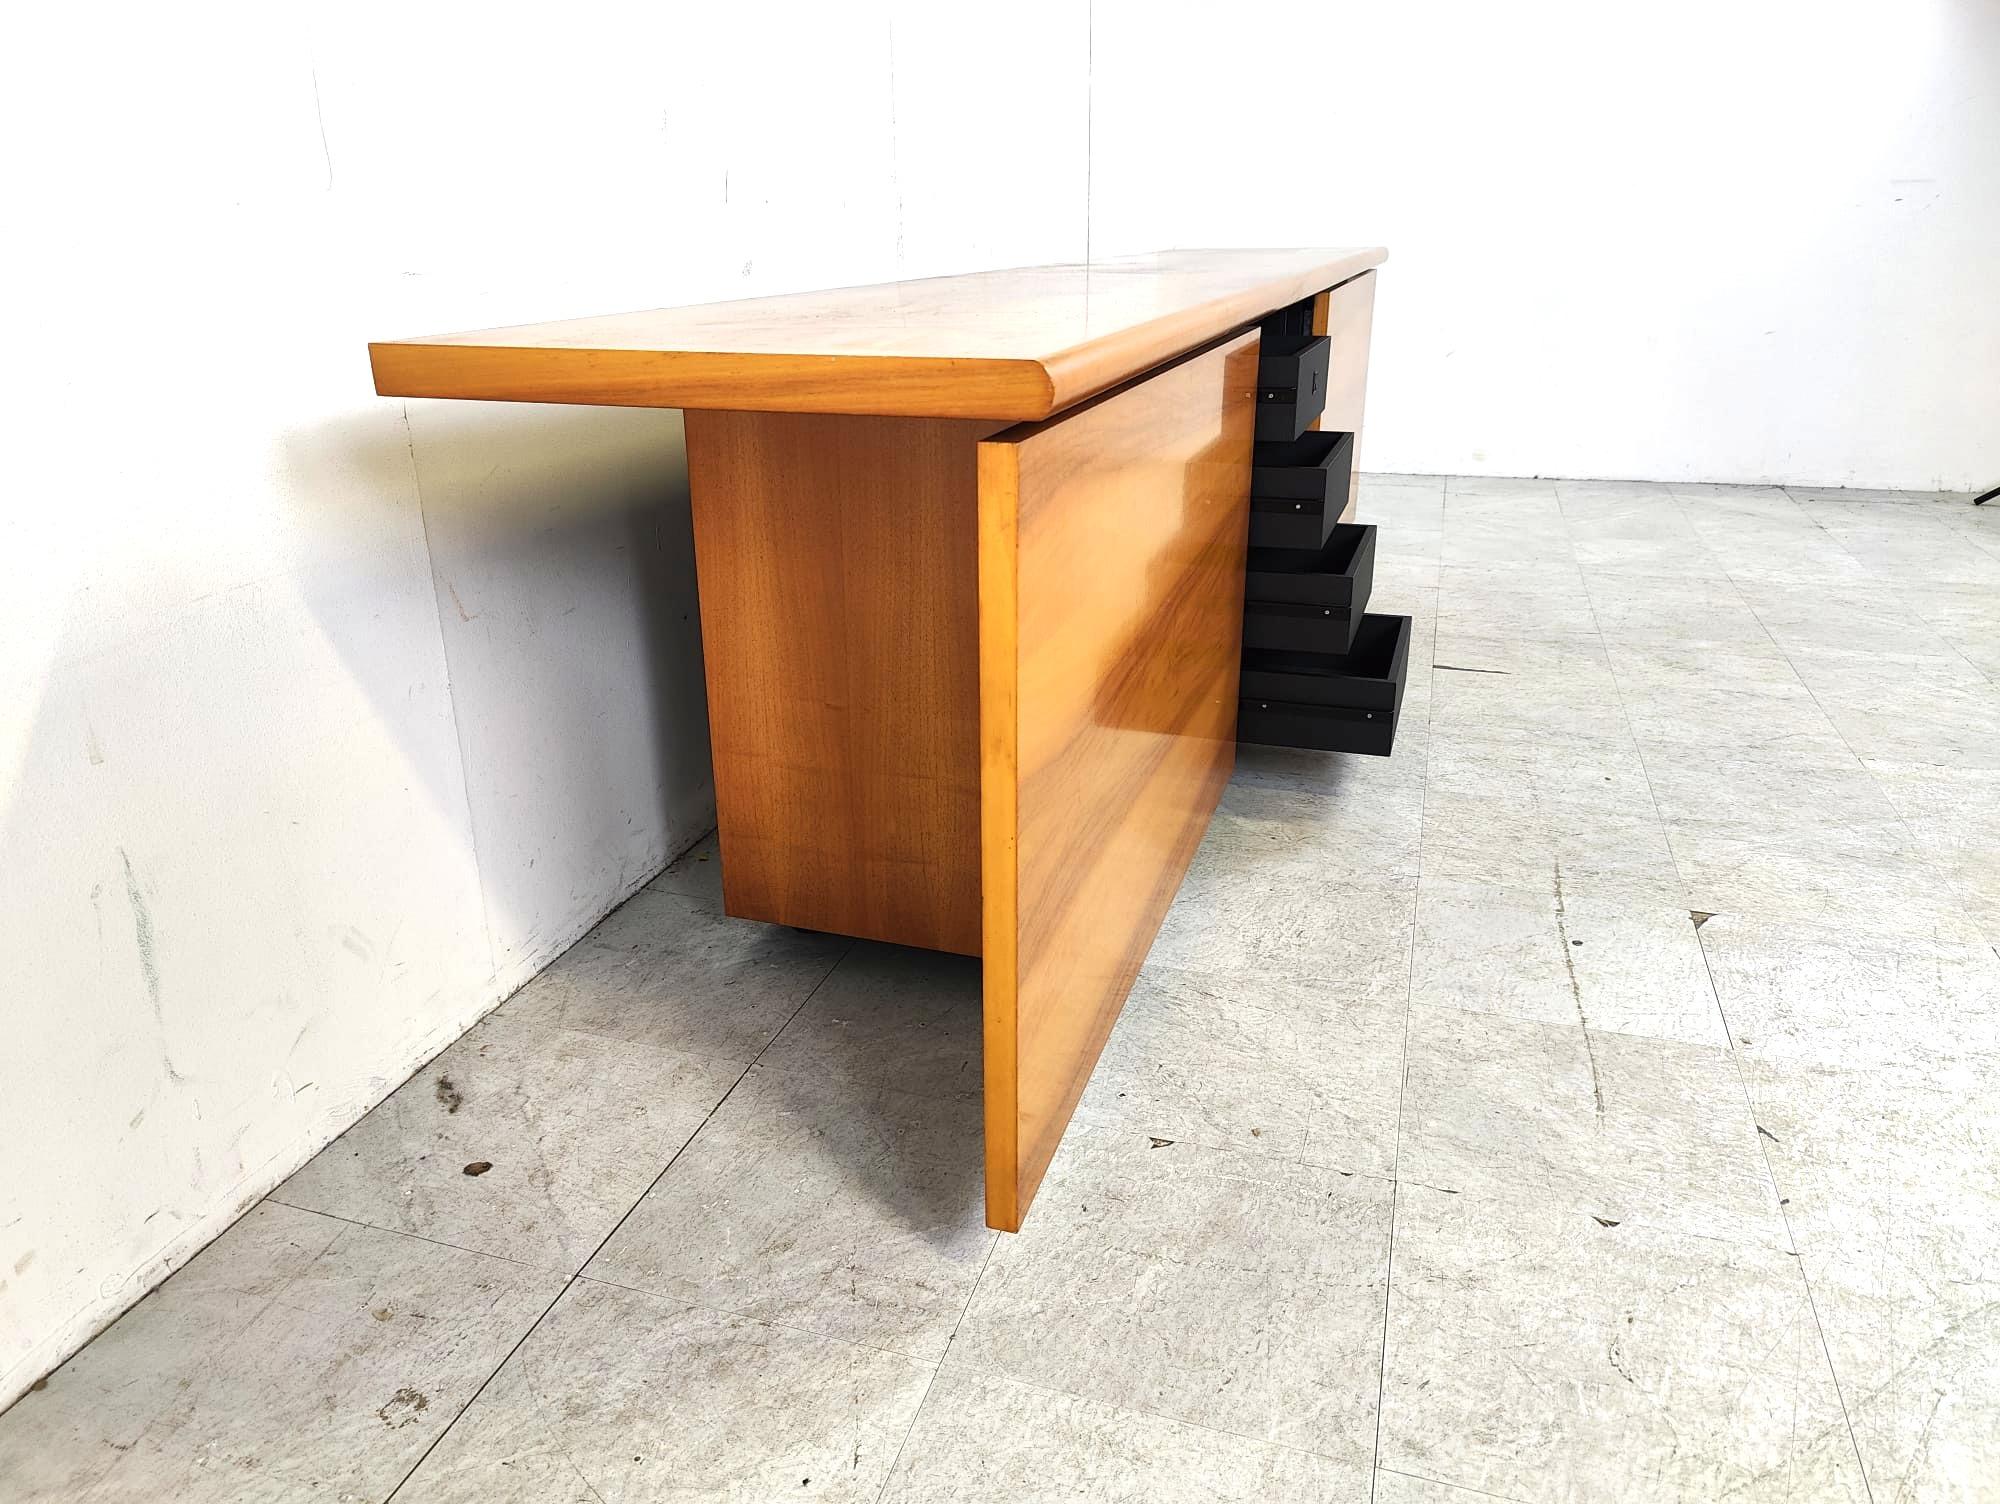 Sheraton sideboard by Giotto Stoppino and Lodovico Acerbis for Acerbis, 1970s (1977). 

Model winner of the Compasso D'oro in 1979

In 1984 it was displayed in Tokyo at the exhibition 